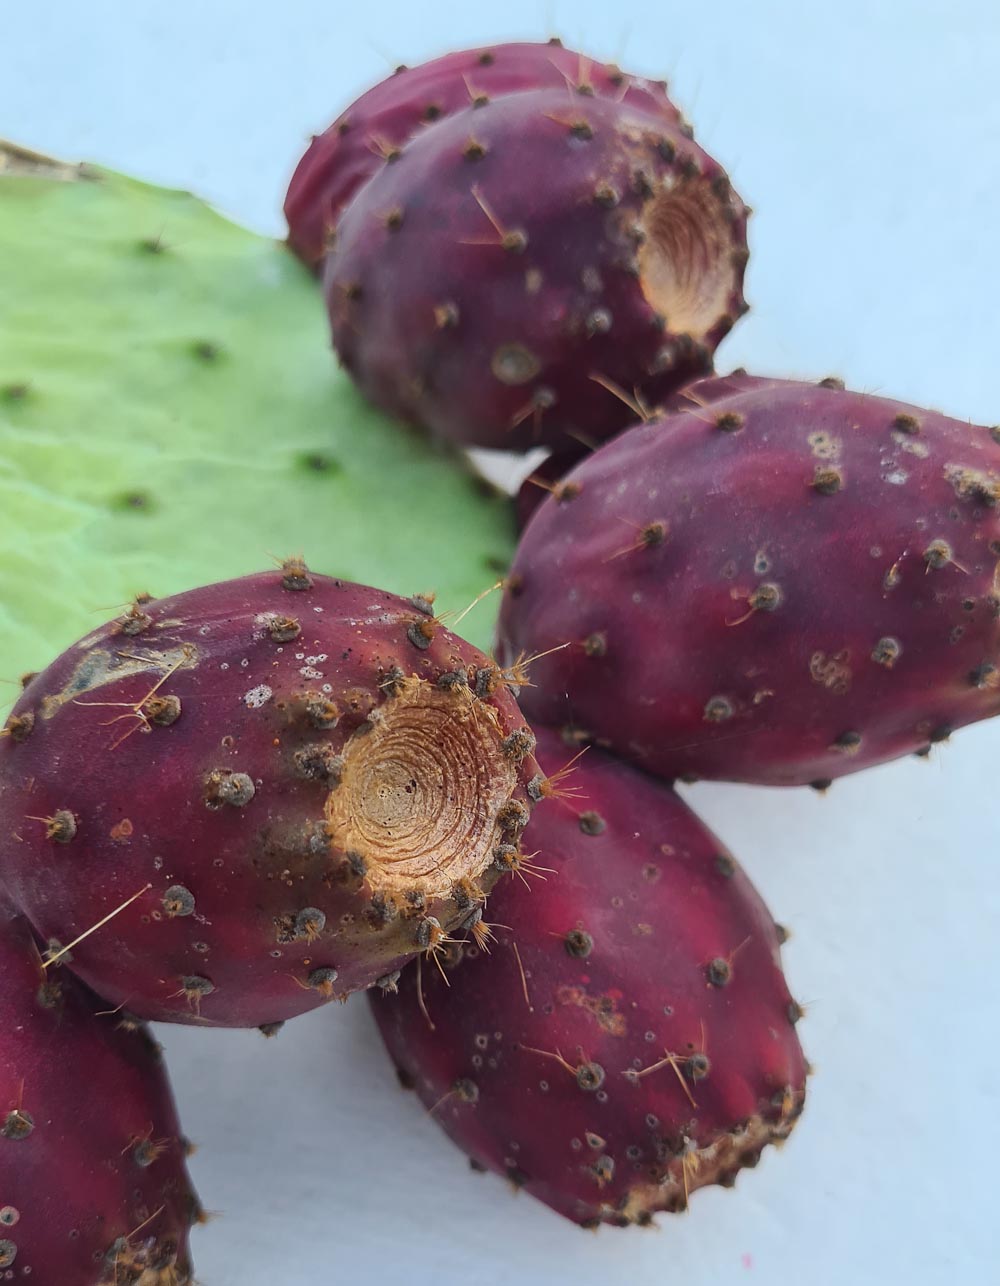 Preserved prickly pears